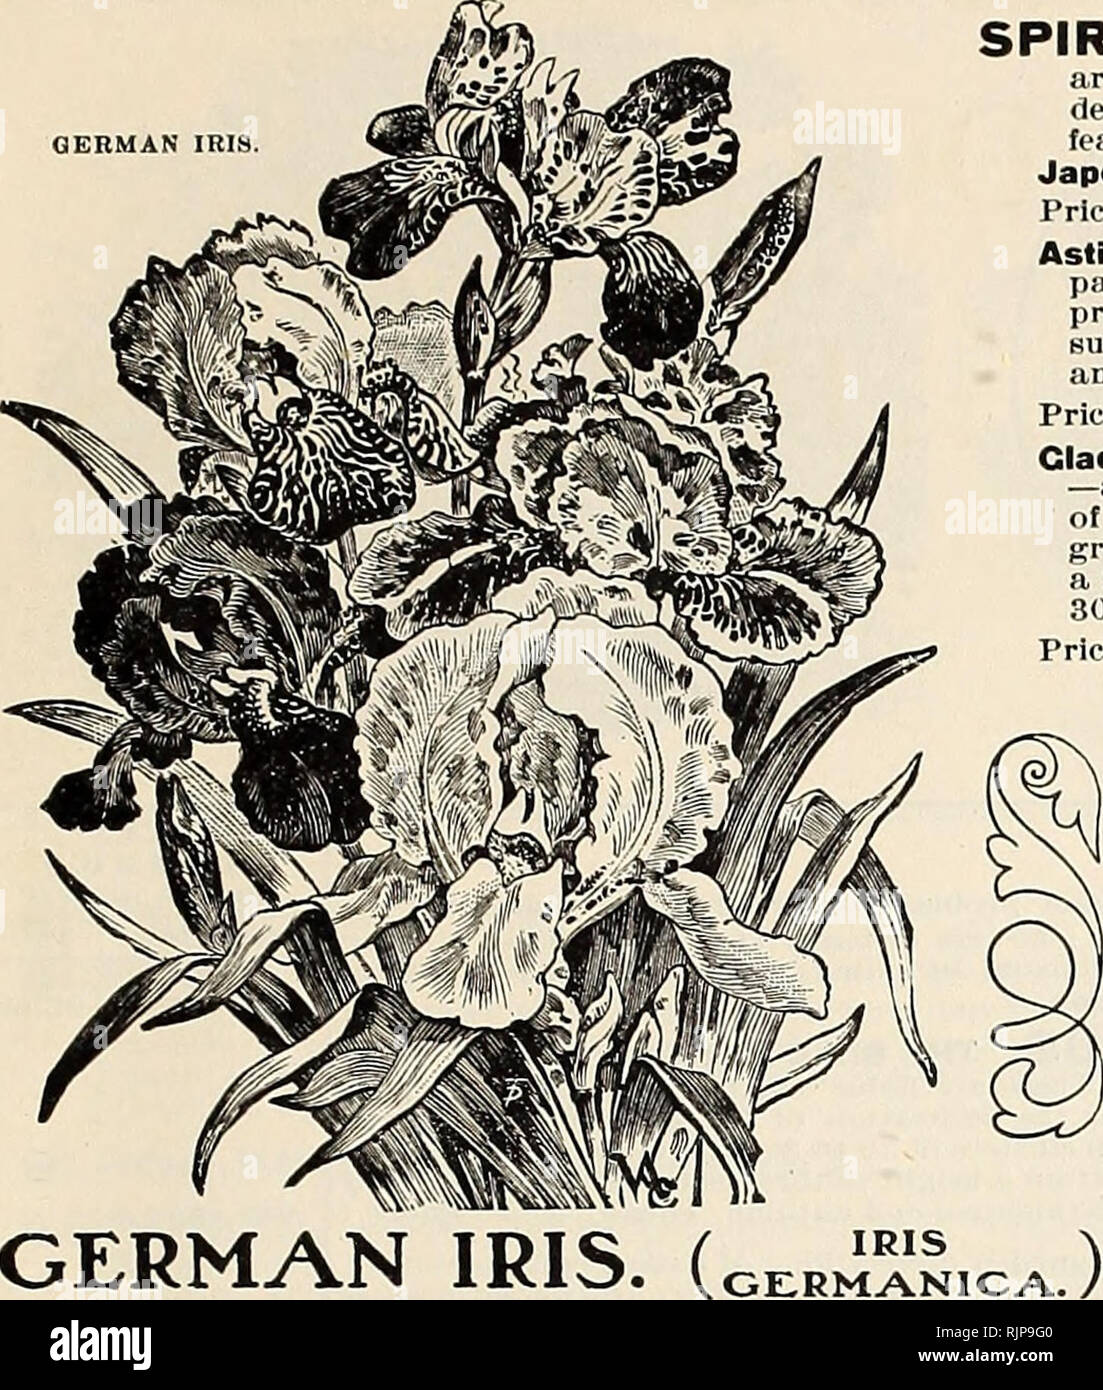 . Autumn catalogue : 1903. Gardening Equipment and supplies Catalogs; Seeds Catalogs; Bulbs (Plants) Catalogs; Flowers Seeds Catalogs; Vegetables Seeds Catalogs. PETER HENDERSON &amp; CO., NEW YORK 29 GERMAN IRIS. SPIRAEA) Or ASTILEtEo In garden culture these flower freely during the summer, and are perfectly hardy, but their great value is when grown in pots for window and greenhouse decoration, in winter and spring, and for forcing for cutting. The flowers are borne in large, feathery panicles of white, and last a long time in bloom. (Ready for shipment in November.) Japonica- The old favori Stock Photo